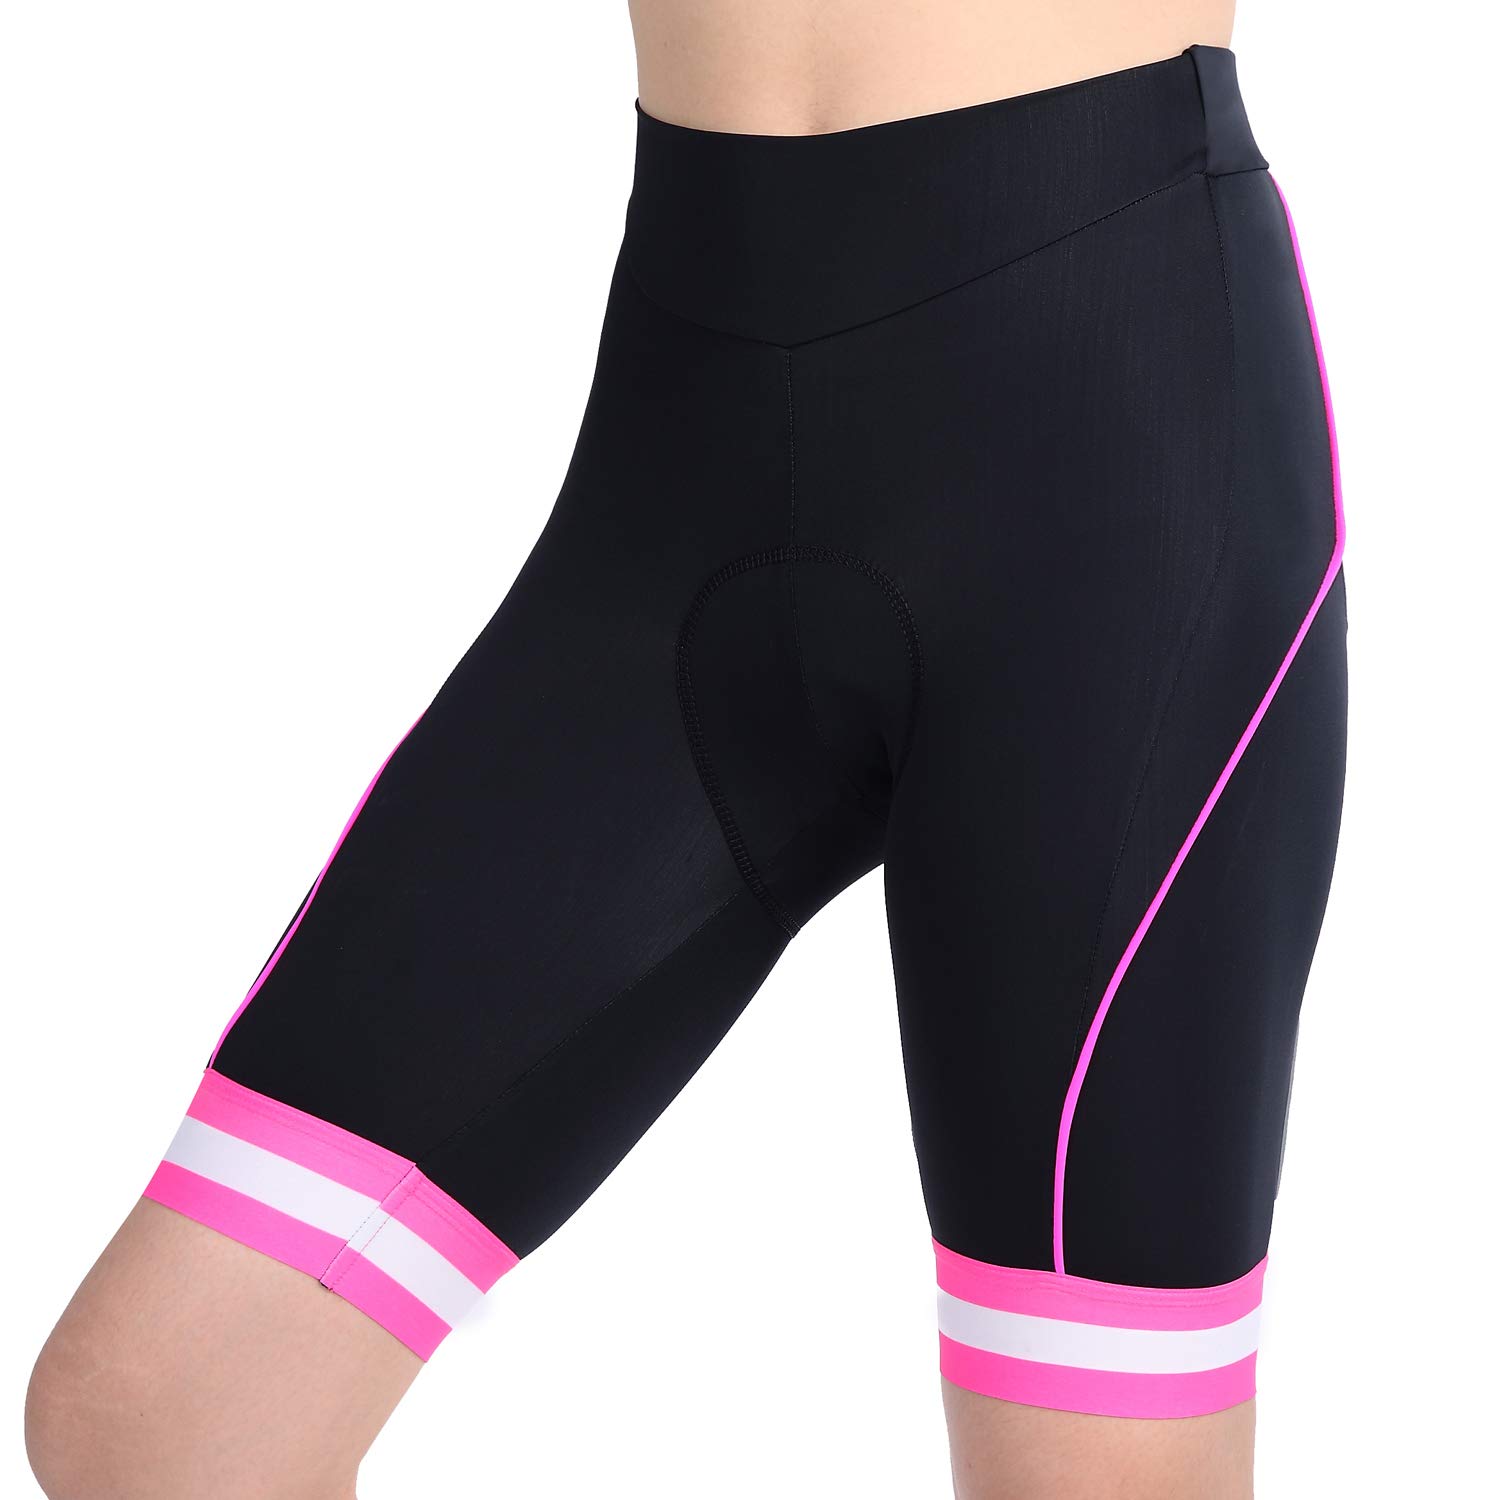 Top 10 Best Bike Shorts for Women - Top Value Reviews